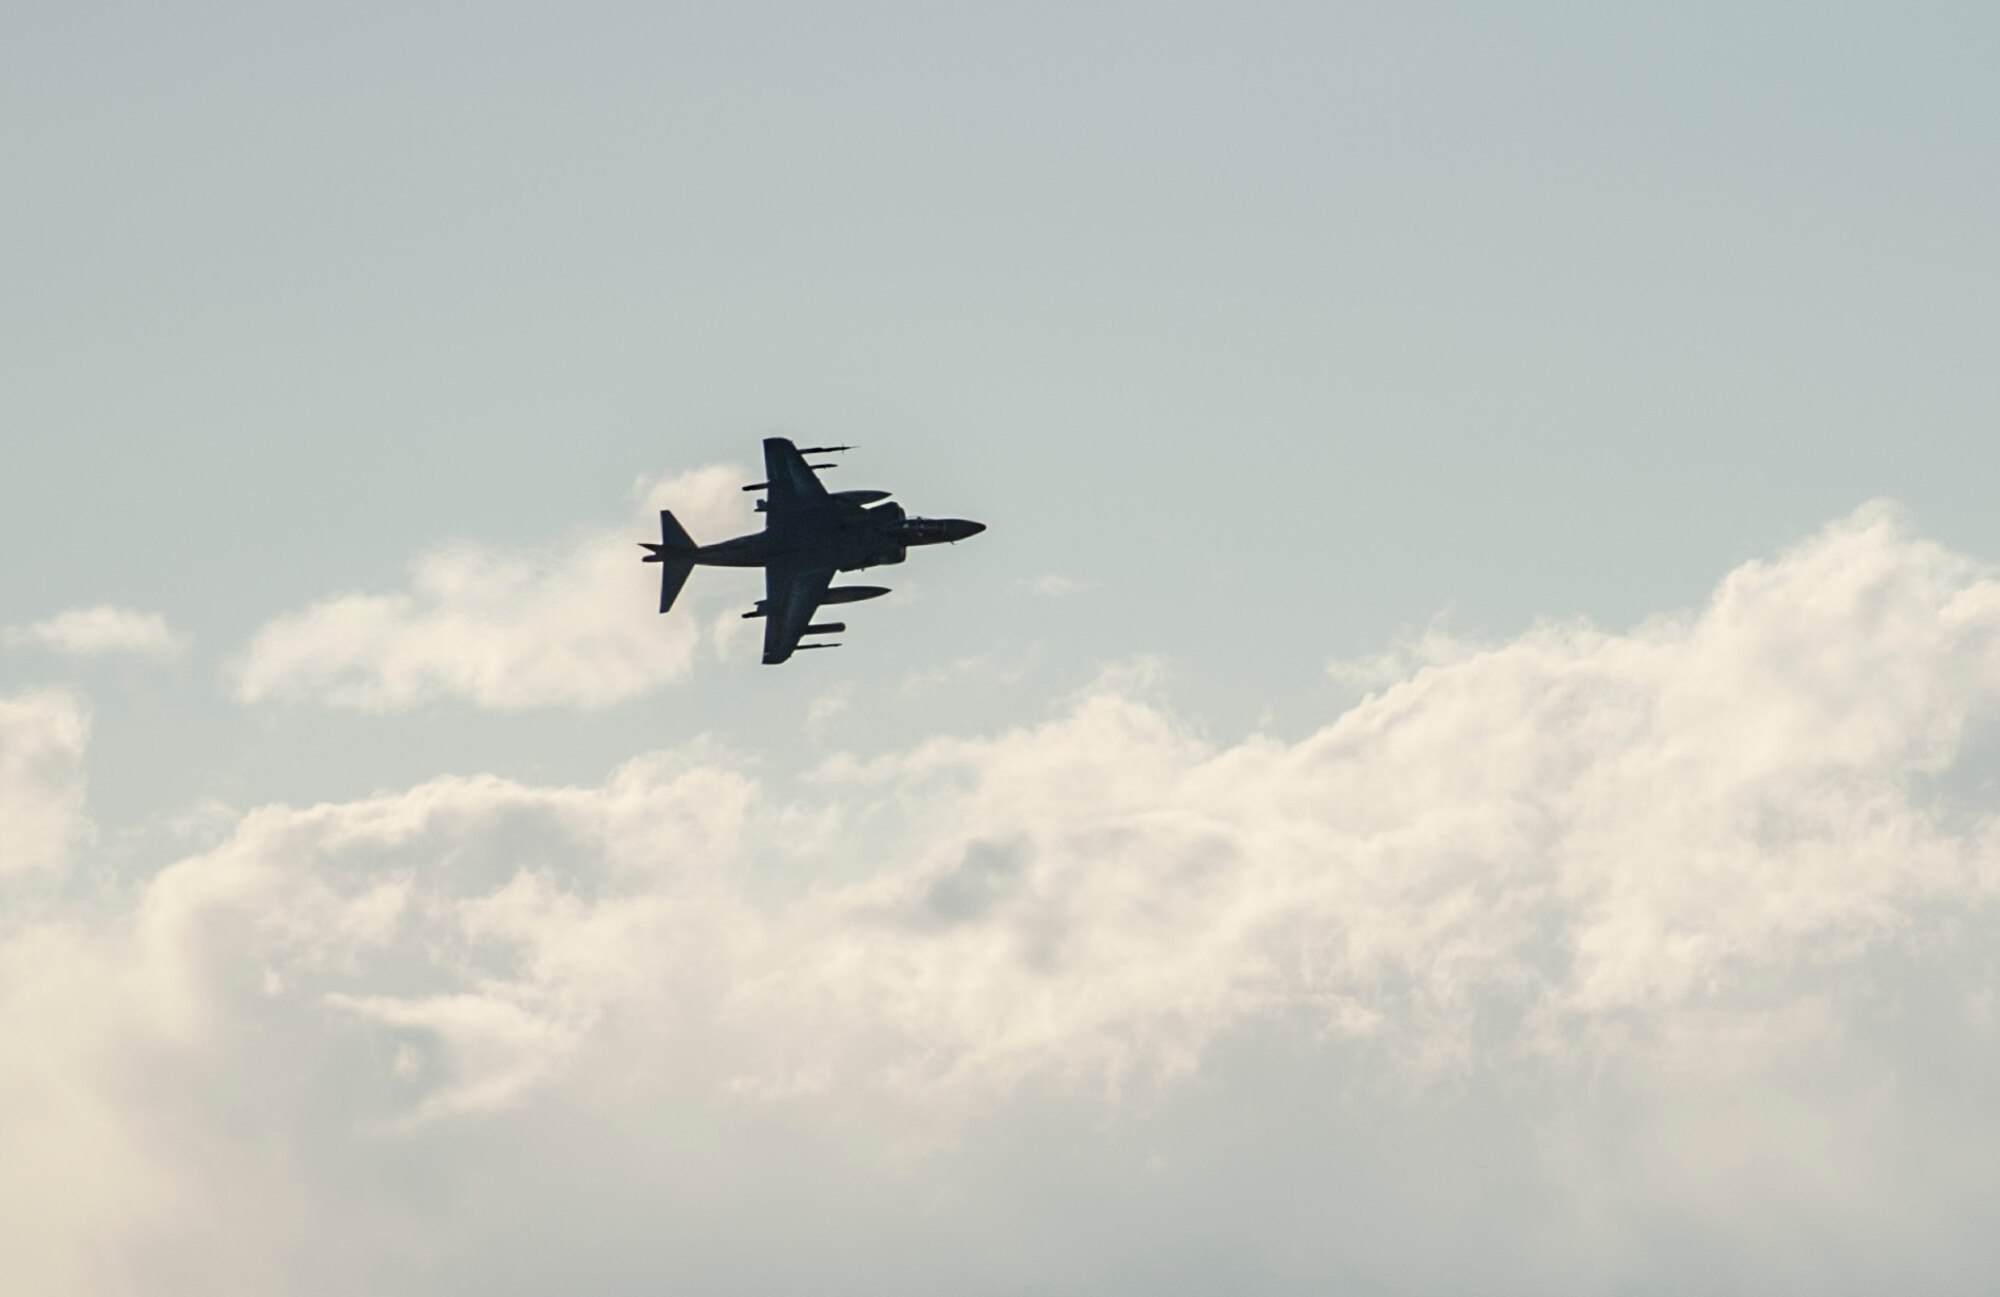 A U.S. Navy AV8-B Harrier buzzes a simulated enemy as a show of force, prior to returning and dropping a simulated bomb on target, Oct. 2, 2013, during exercise Mountain Roundup 2013. More than 300 Germans and Canadians, and an equal number of U.S. Navy, Marine Corps, Army and Air Force are participating in ground operations, close-air support, urban combatives, convoy operations, basic fighter maneuvers, counter air and multiple air-to-air training scenarios. (U.S. Air Force photo by Master Sgt. Kevin Wallace/RELEASED)